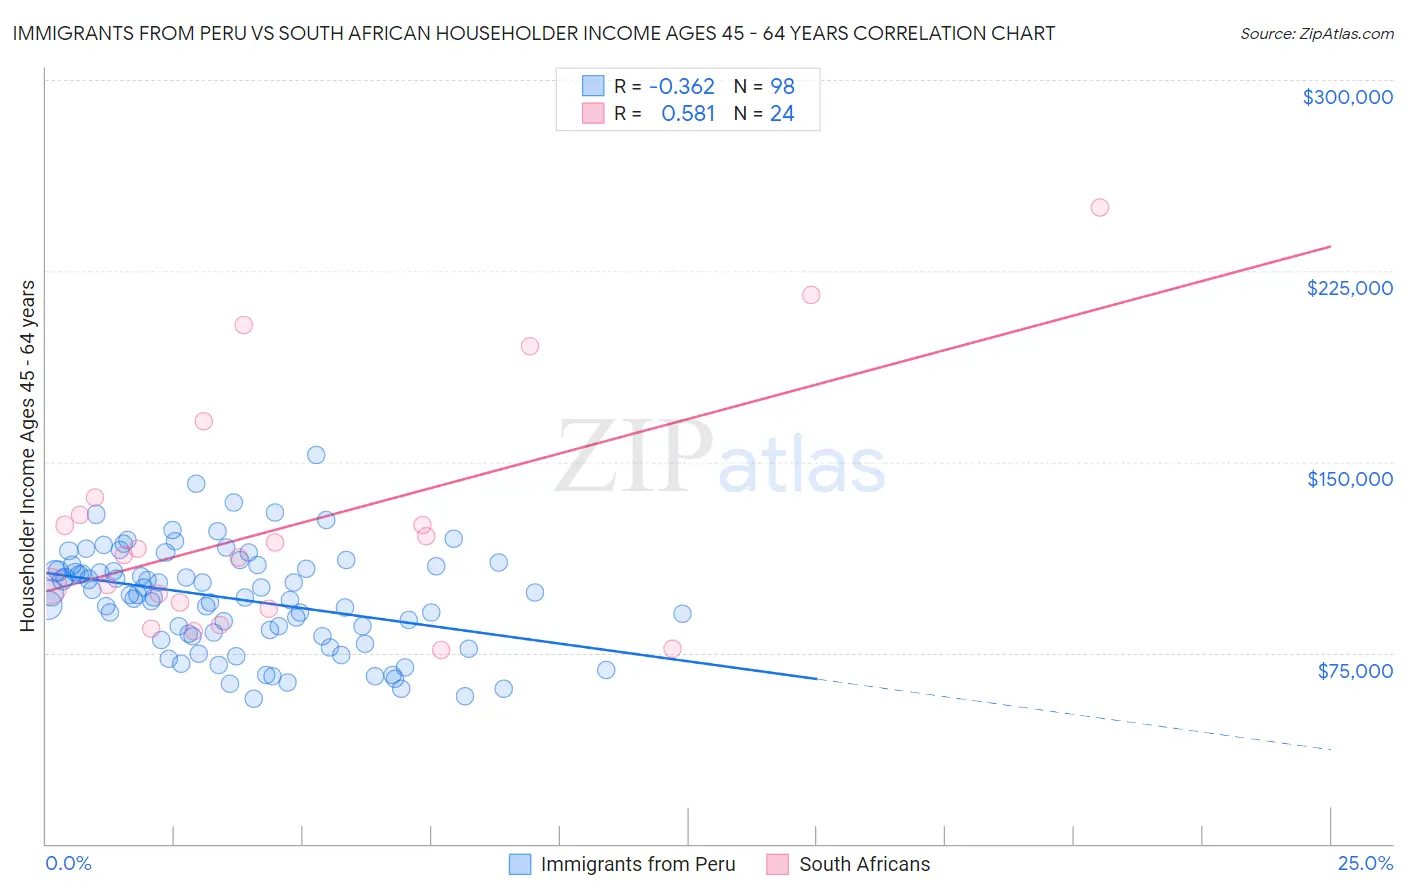 Immigrants from Peru vs South African Householder Income Ages 45 - 64 years